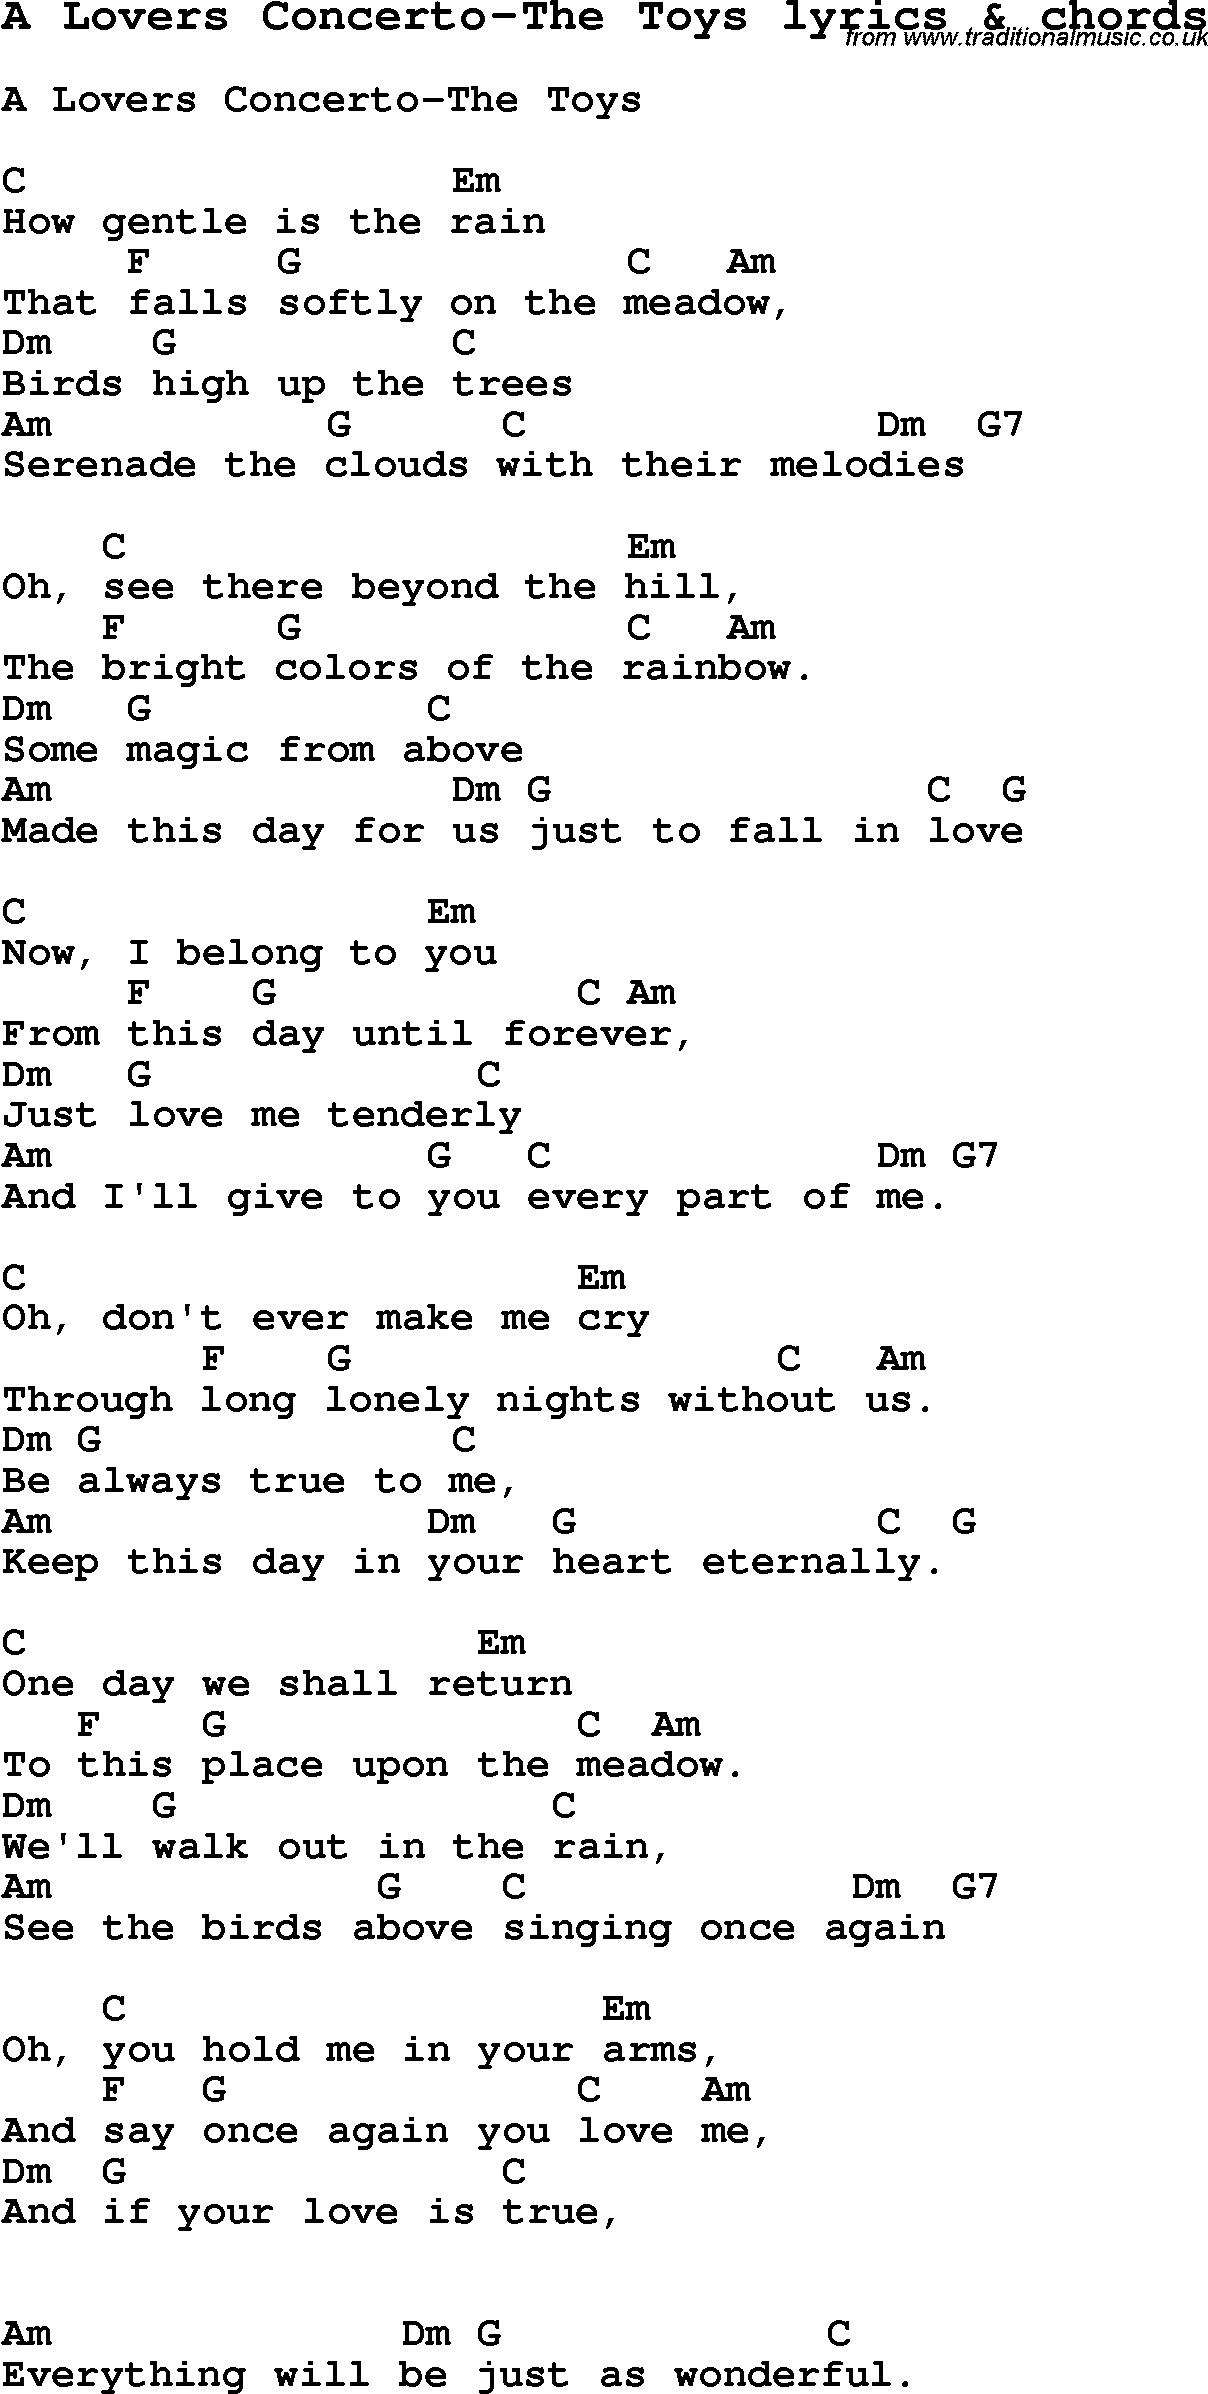 Love Song Lyrics for: A Lovers Concerto-The Toys with chords for Ukulele, Guitar Banjo etc.